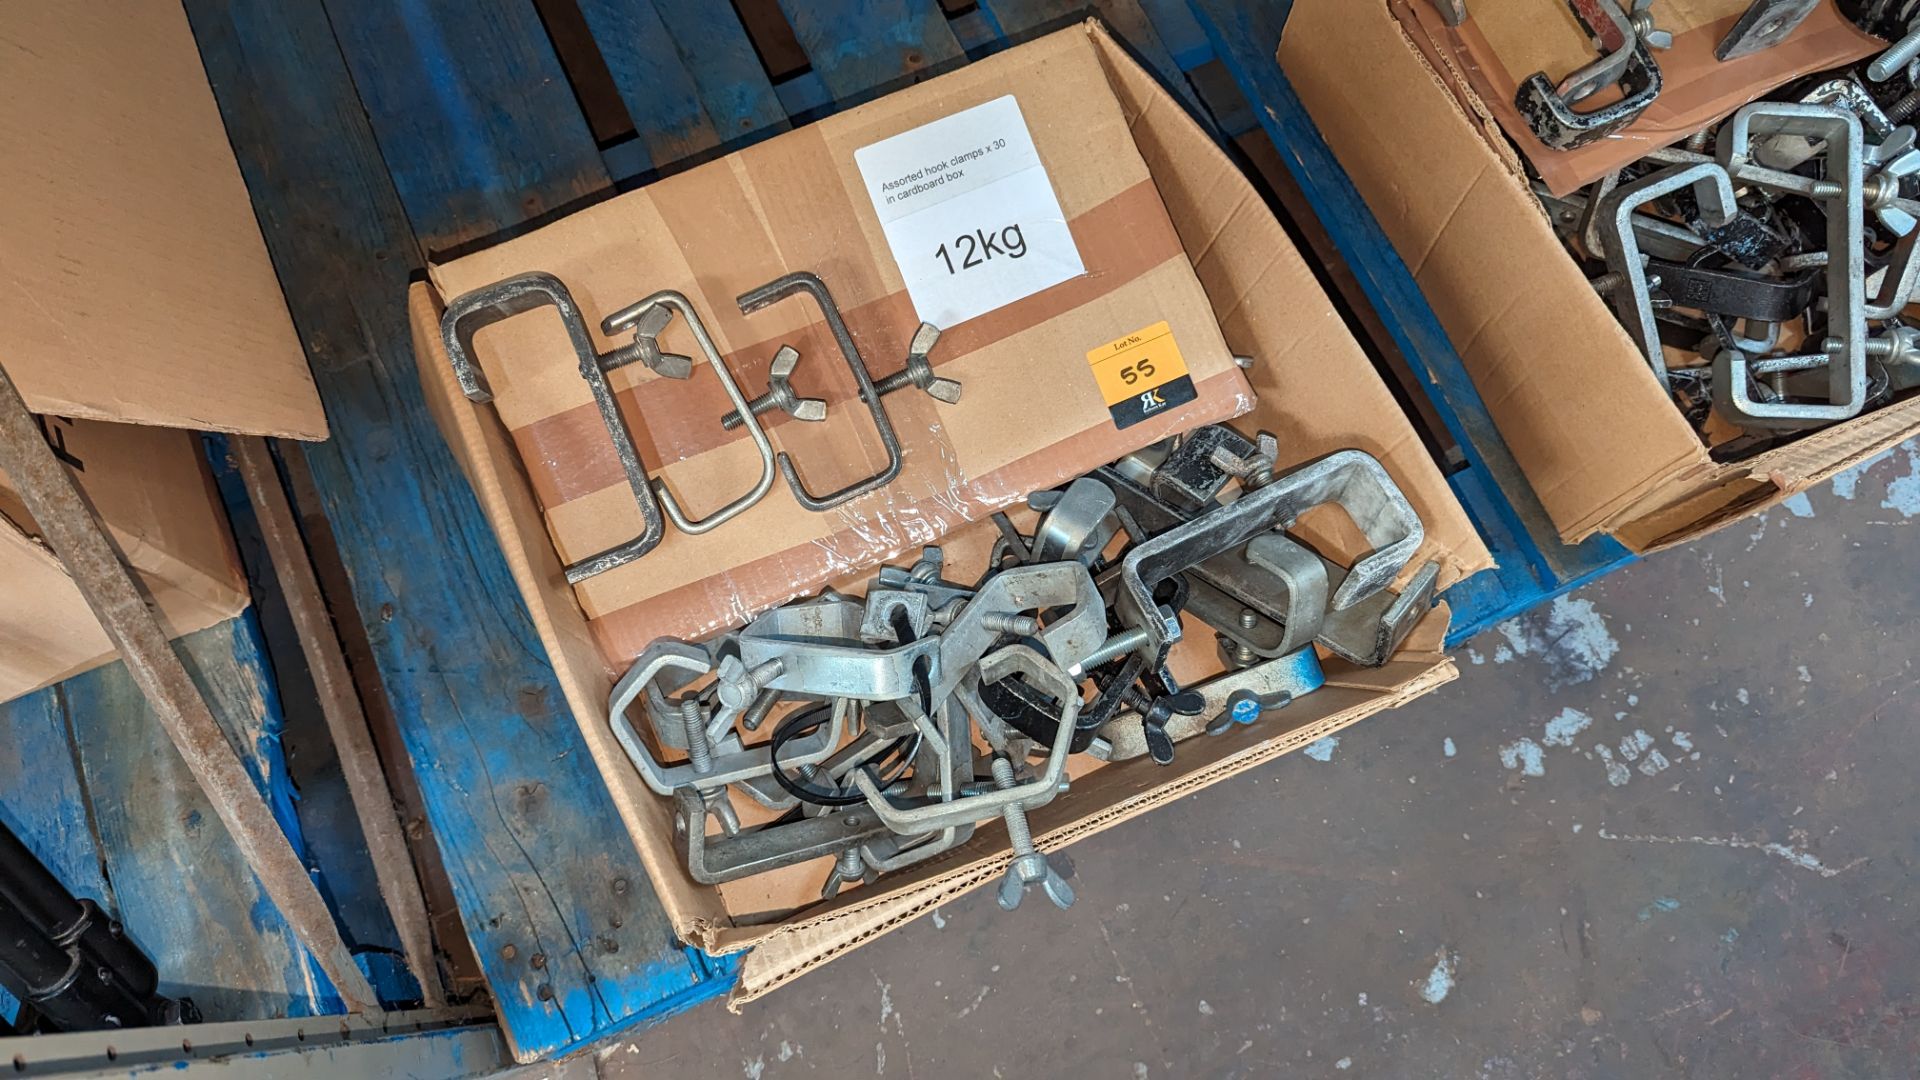 30 off assorted hook clamps in cardboard box. Total lot weight 12kg - Image 5 of 5